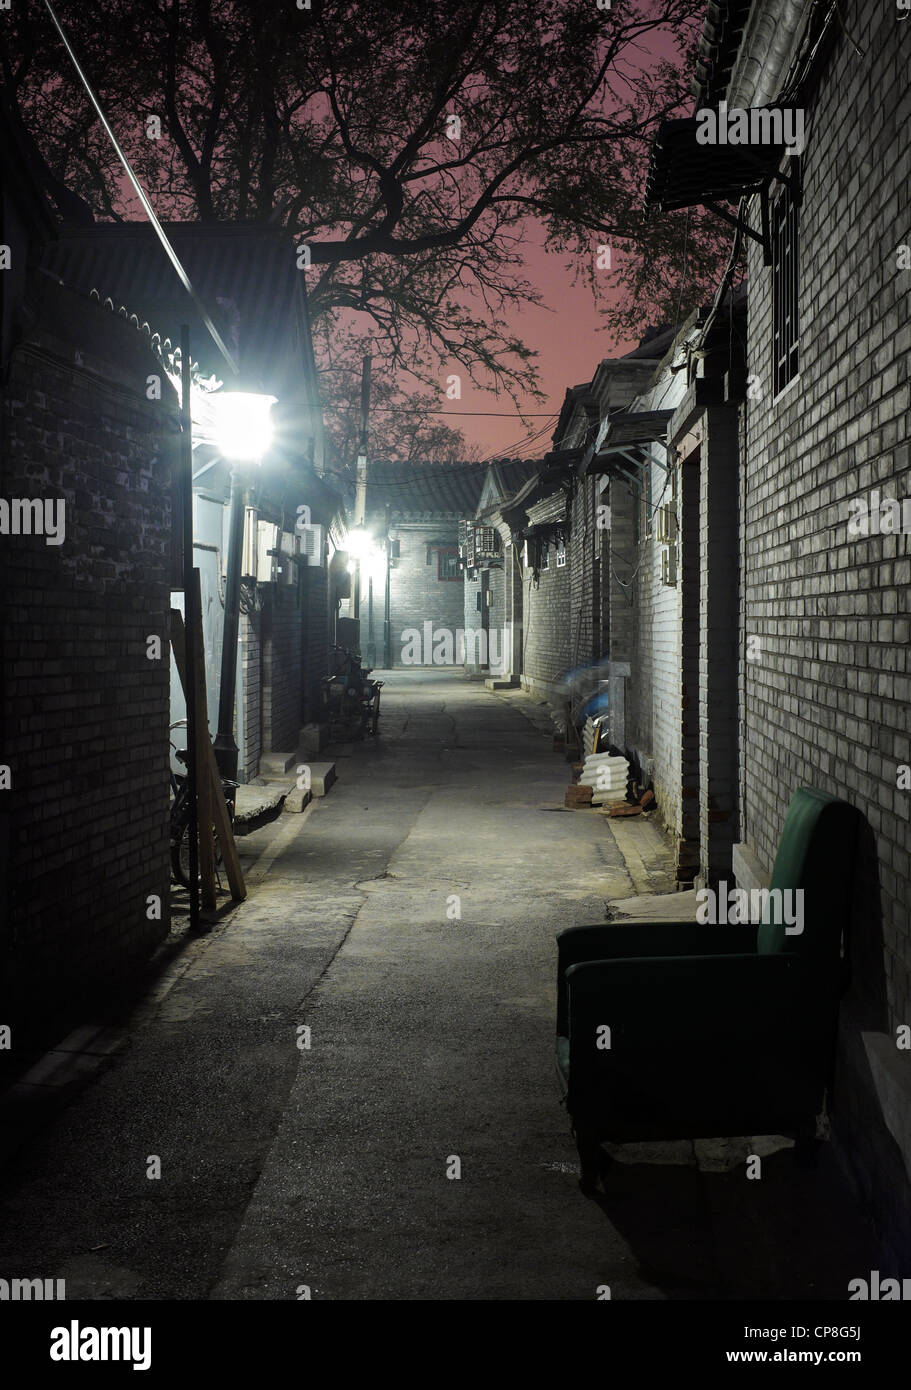 View of historic lane or hutong at night in Beijing China Stock Photo